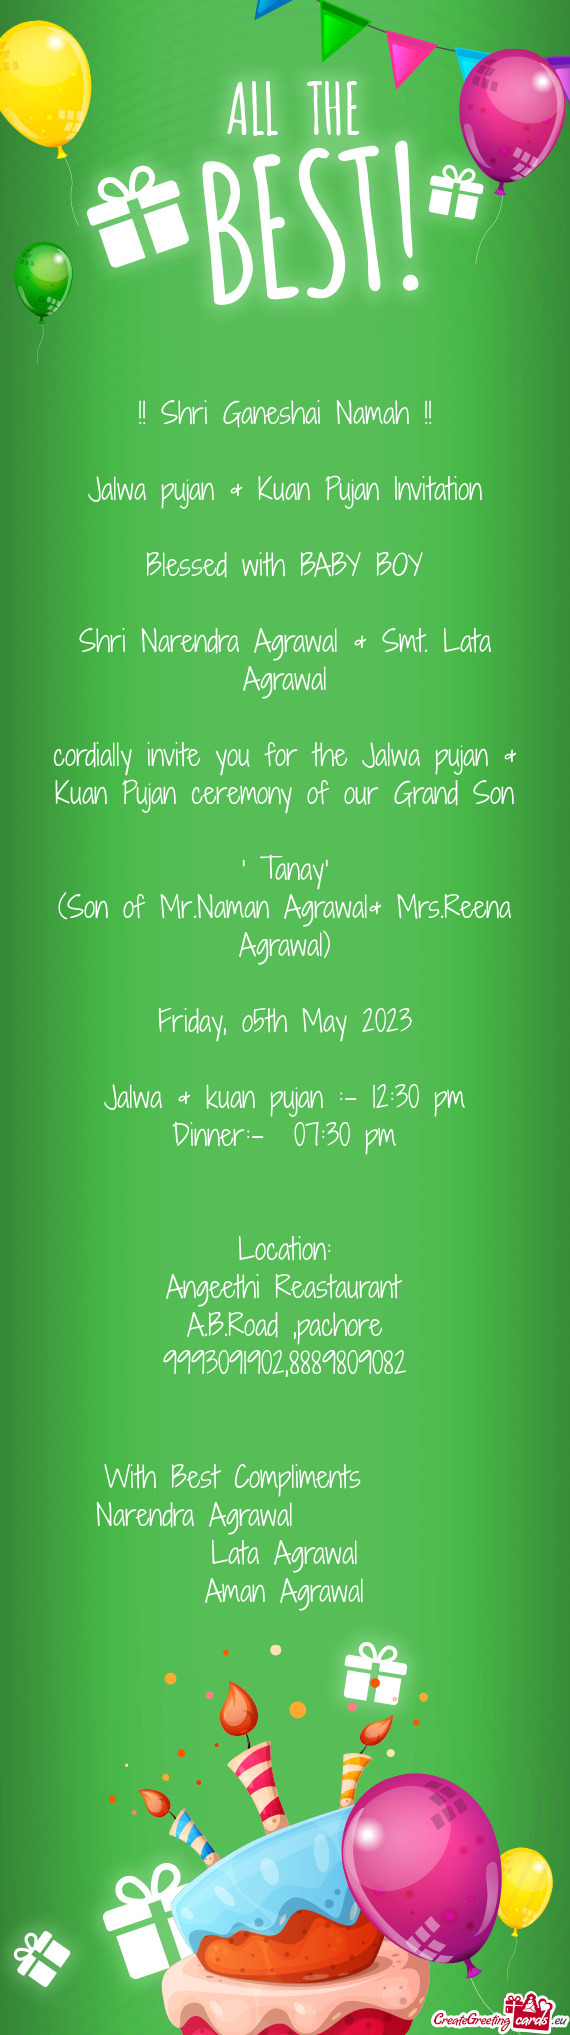 Cordially invite you for the Jalwa pujan & Kuan Pujan ceremony of our Grand Son